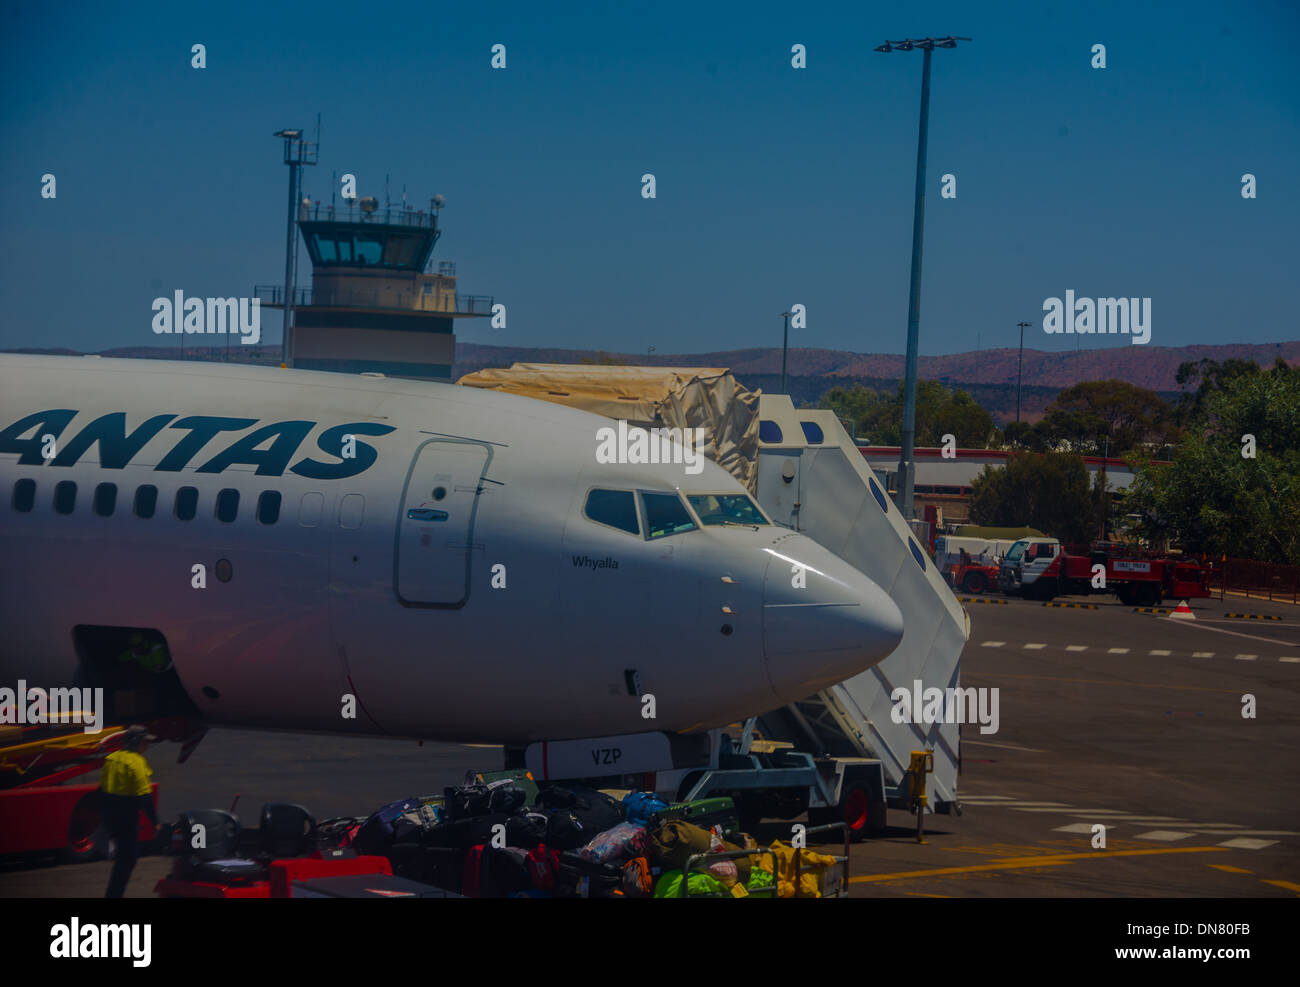 Qantas plane on tarmac with red centre background at Alice Springs baggage handler on tarmac loading airplane flight steps Stock Photo